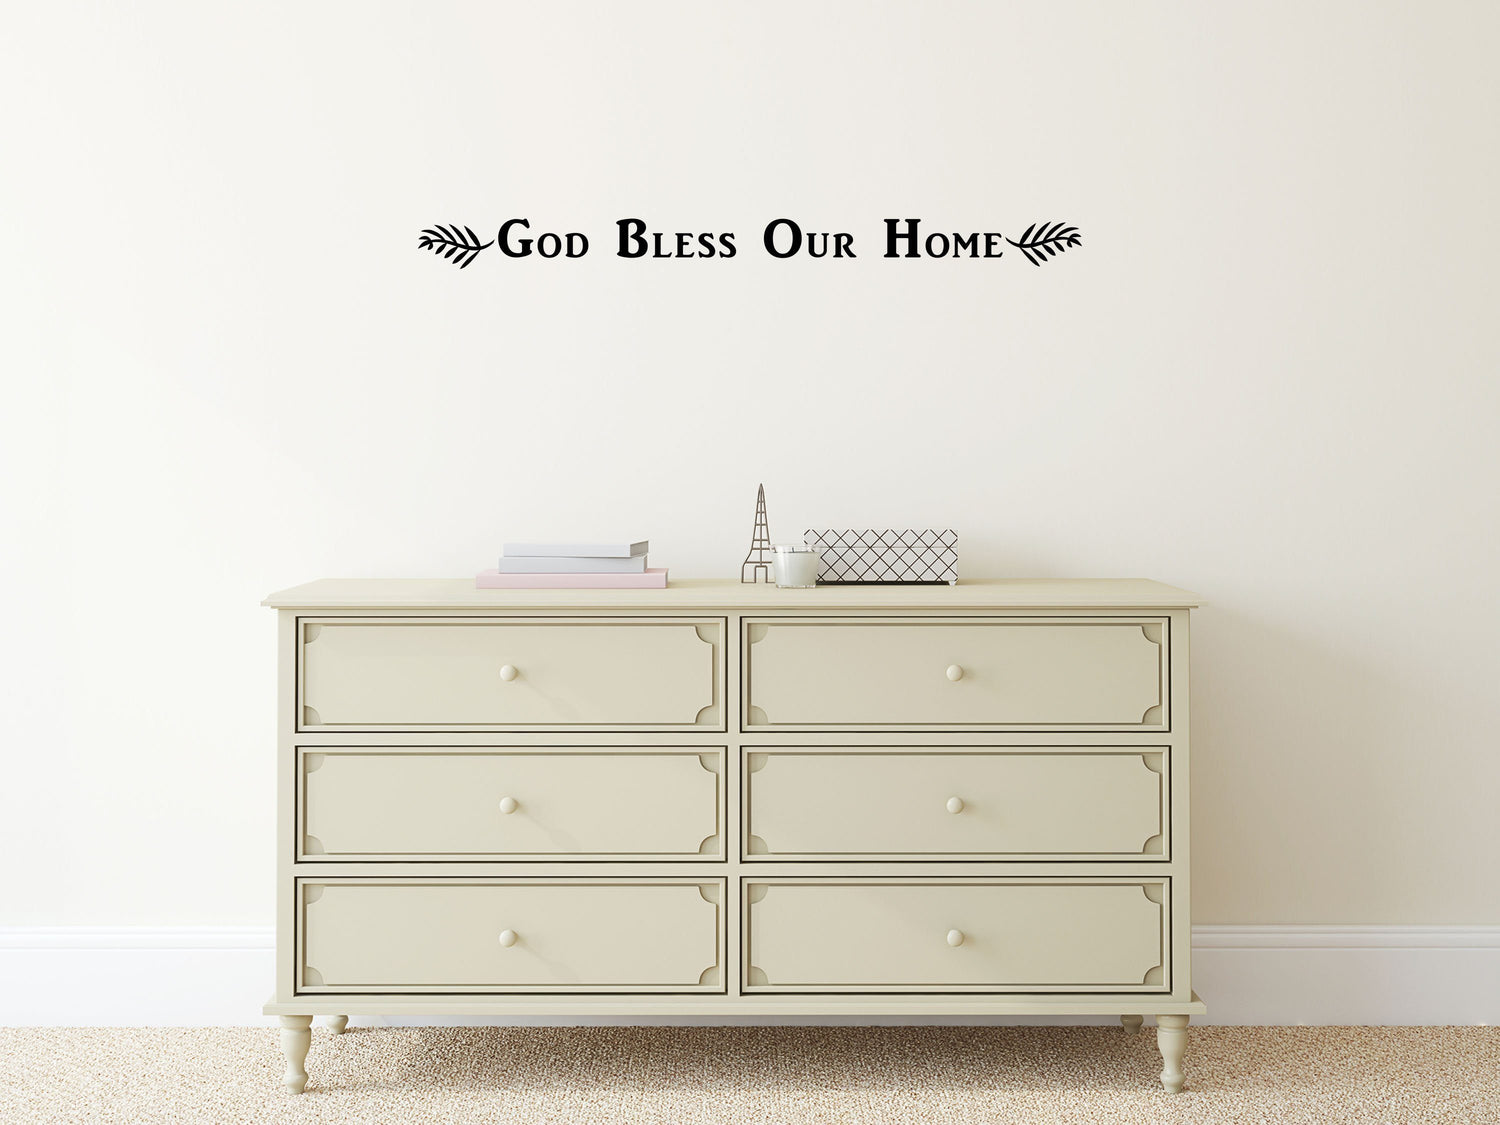 God Bless Our Home - Home Wall Decor- Inspirational Wall Decals Vinyl Wall Decal Inspirational Wall Signs 